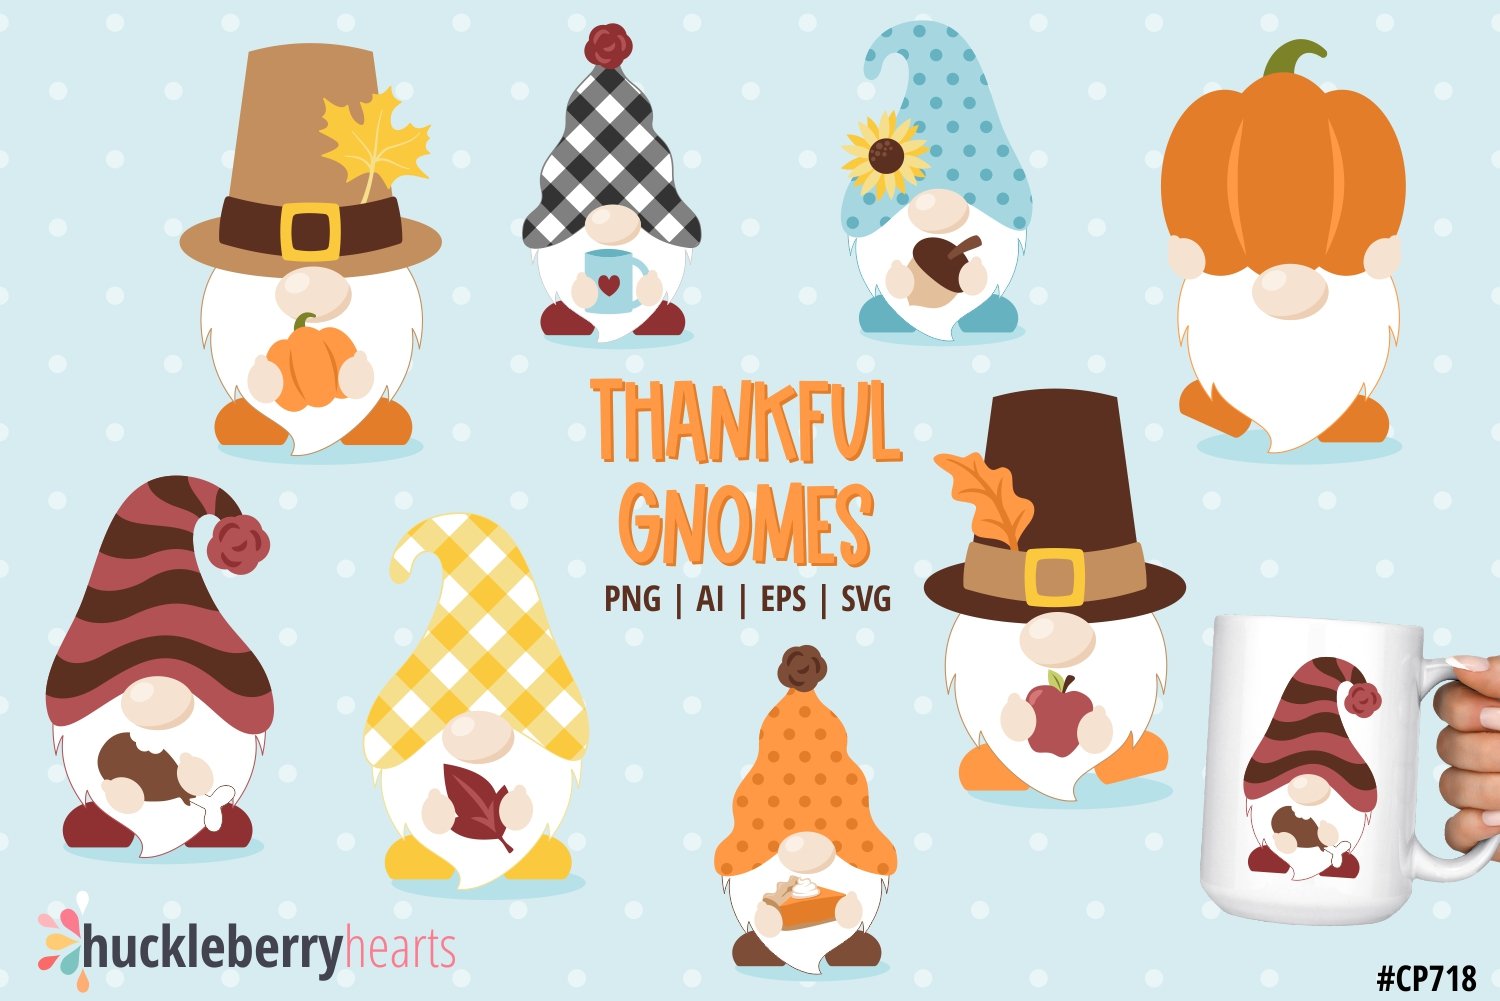 Thankful gnomes collection.